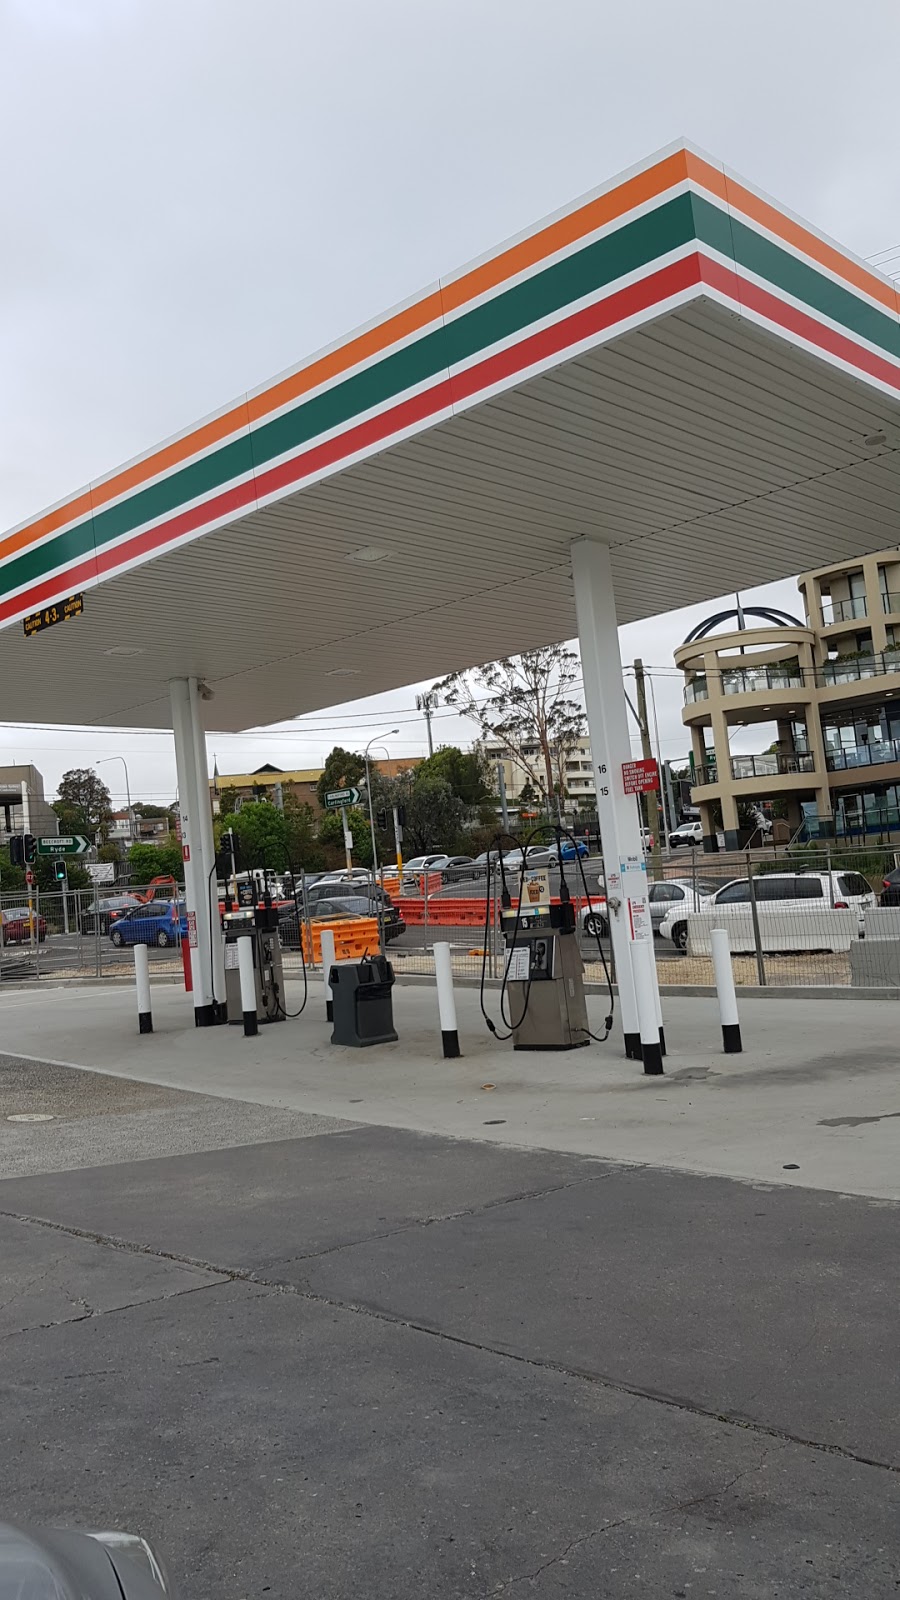 7-Eleven Epping | gas station | 246 Beecroft Road &, Carlingford Rd, Epping NSW 2121, Australia | 0298691203 OR +61 2 9869 1203